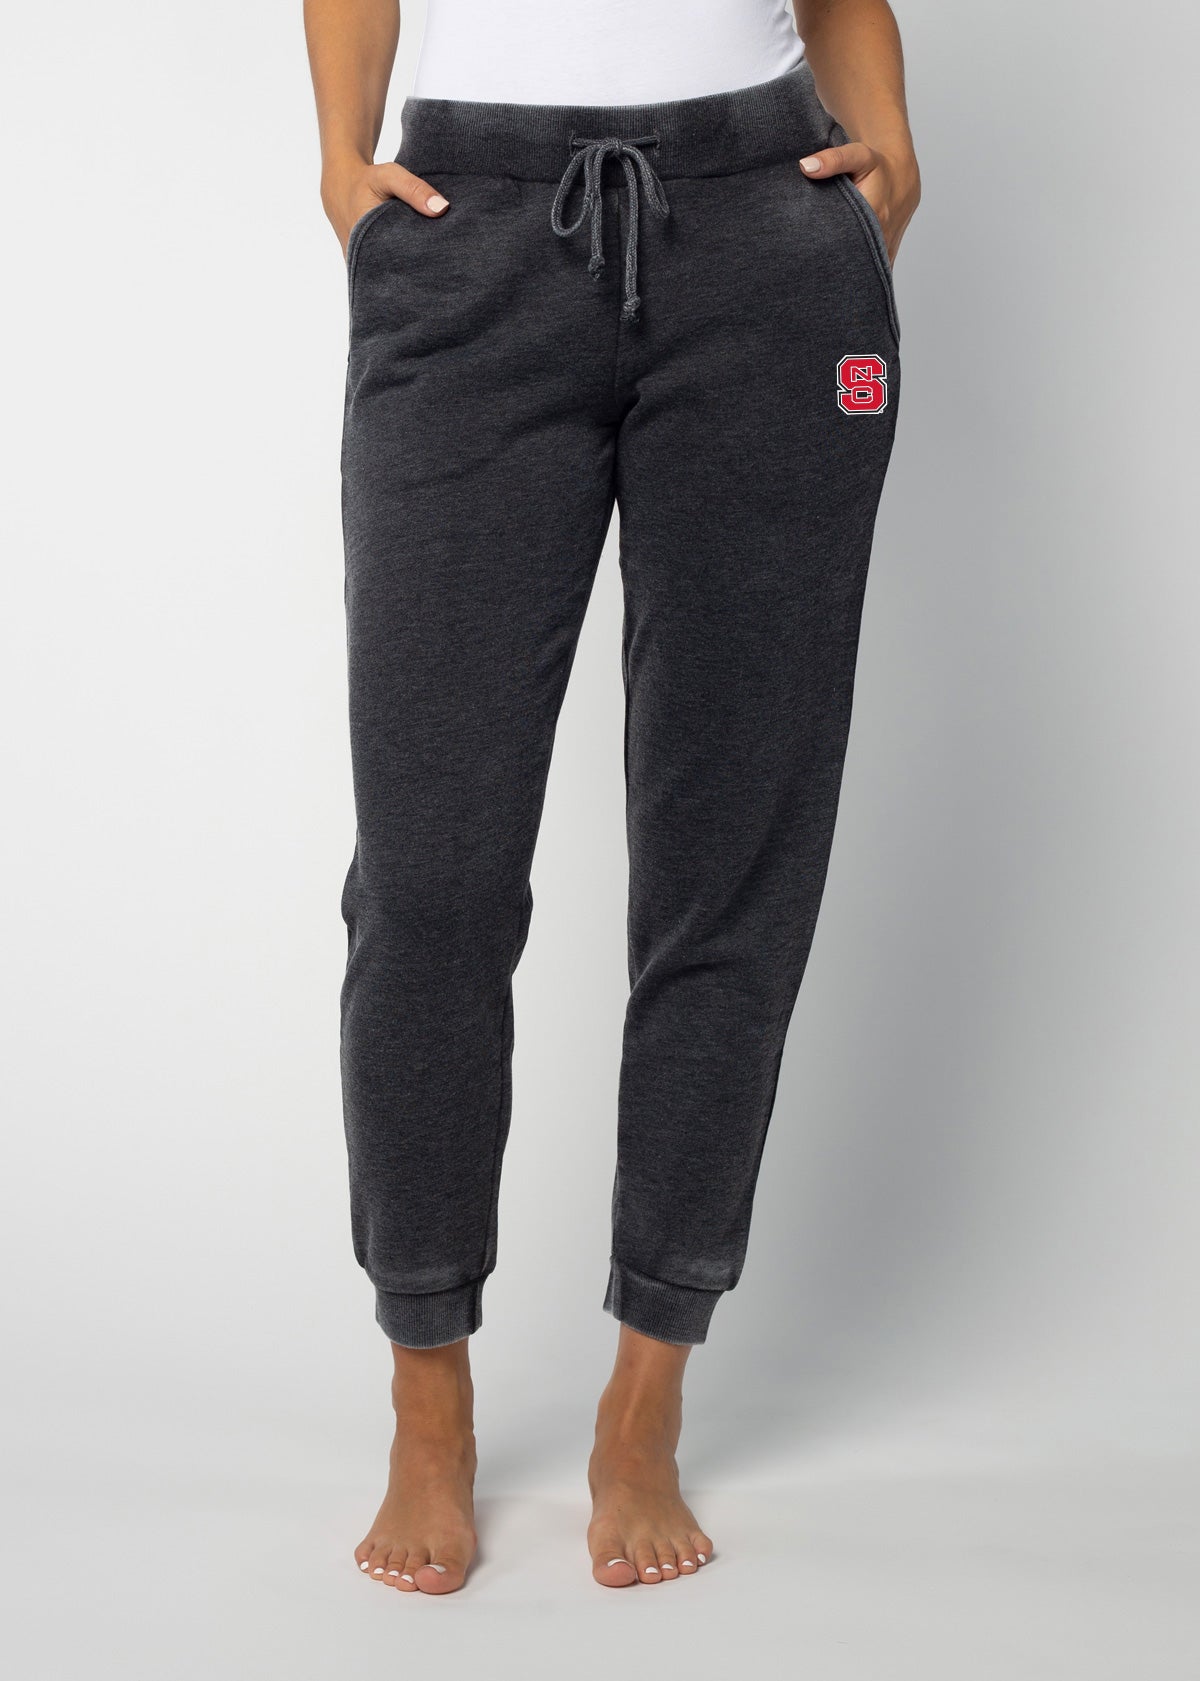 NC State Wolfpack sweatpants